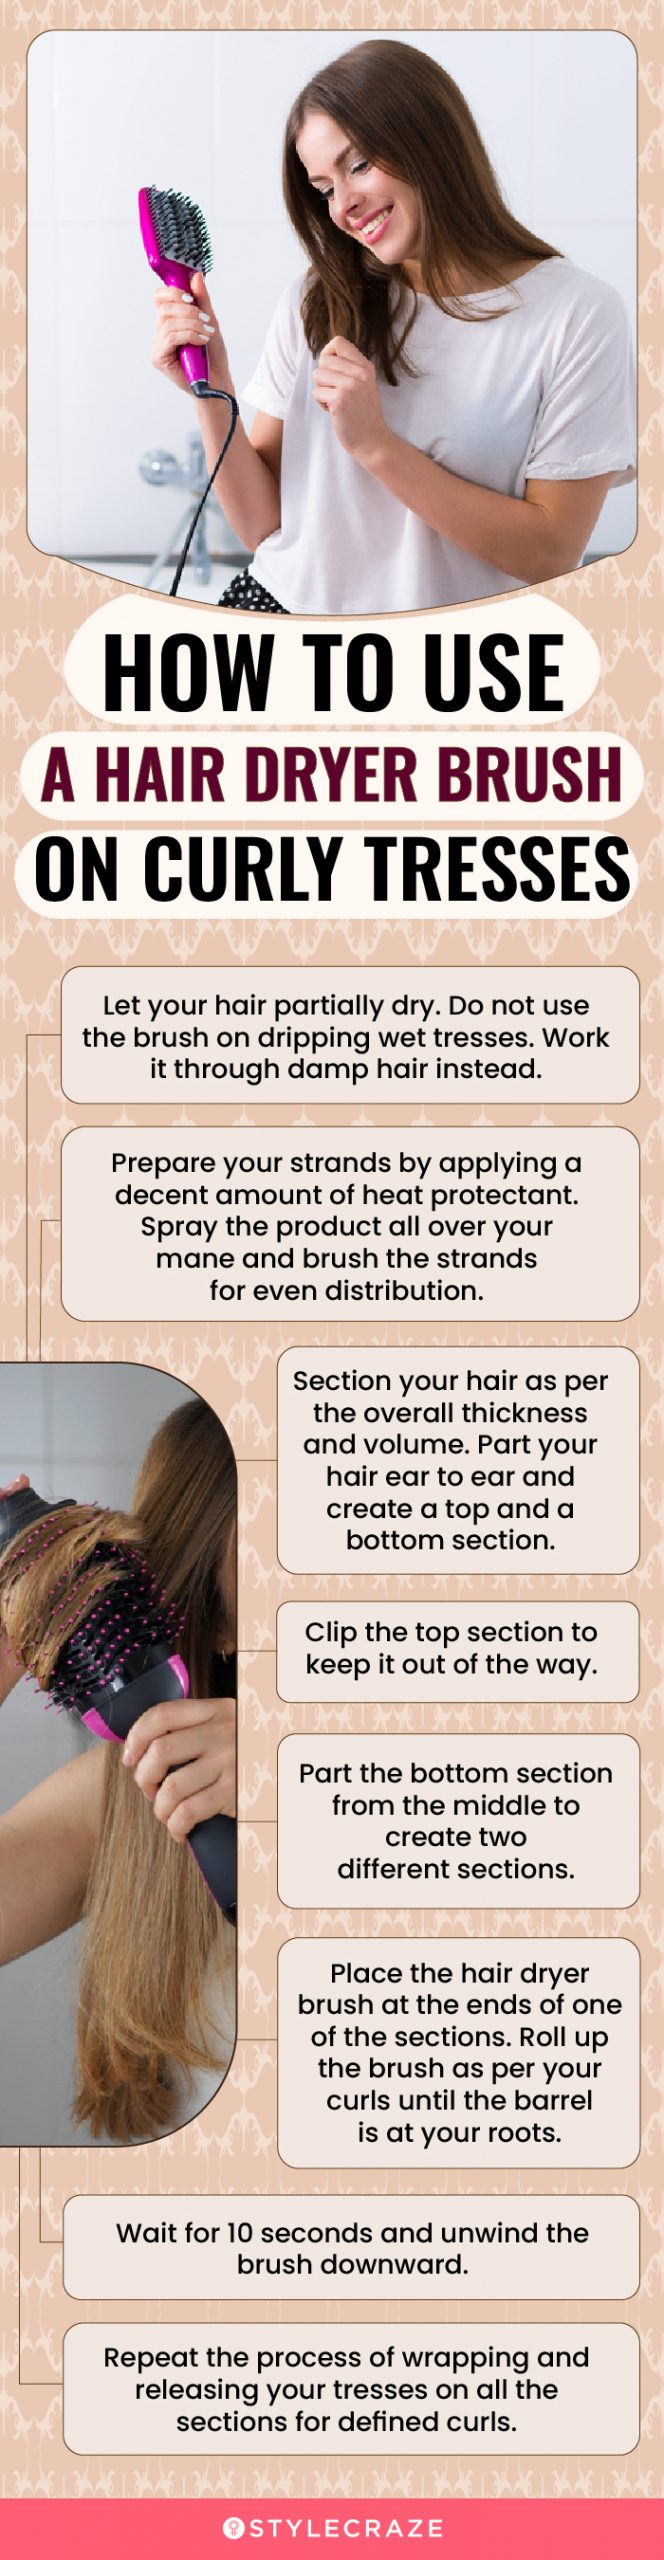 How To Use A Hair Dryer Brush On Curly Tresses